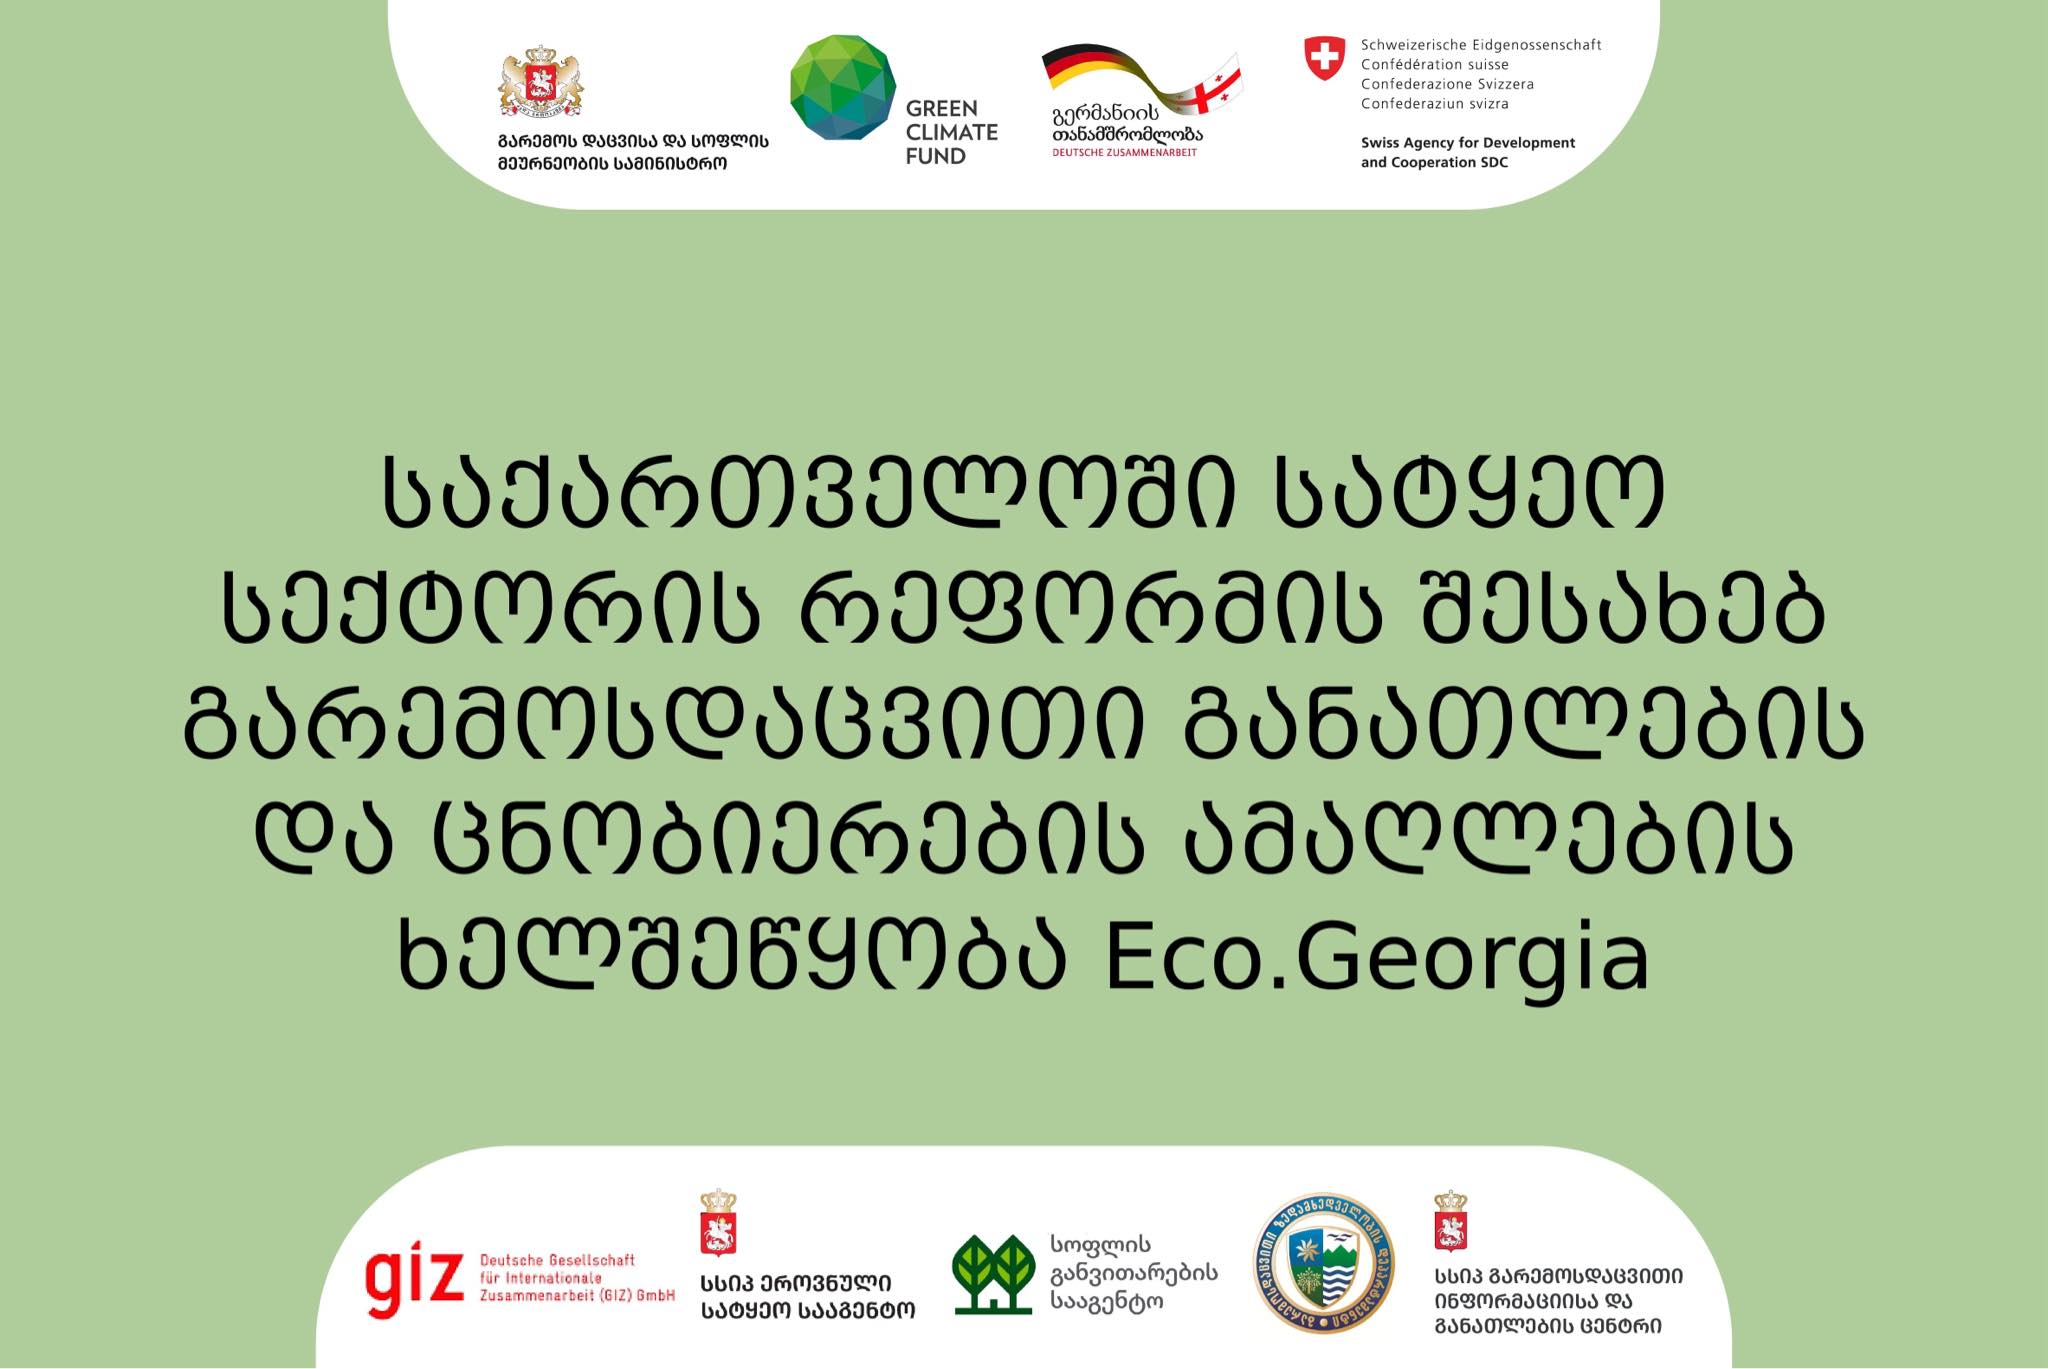 Promoting environmental education and awareness raising on forest sector reform in Georgia